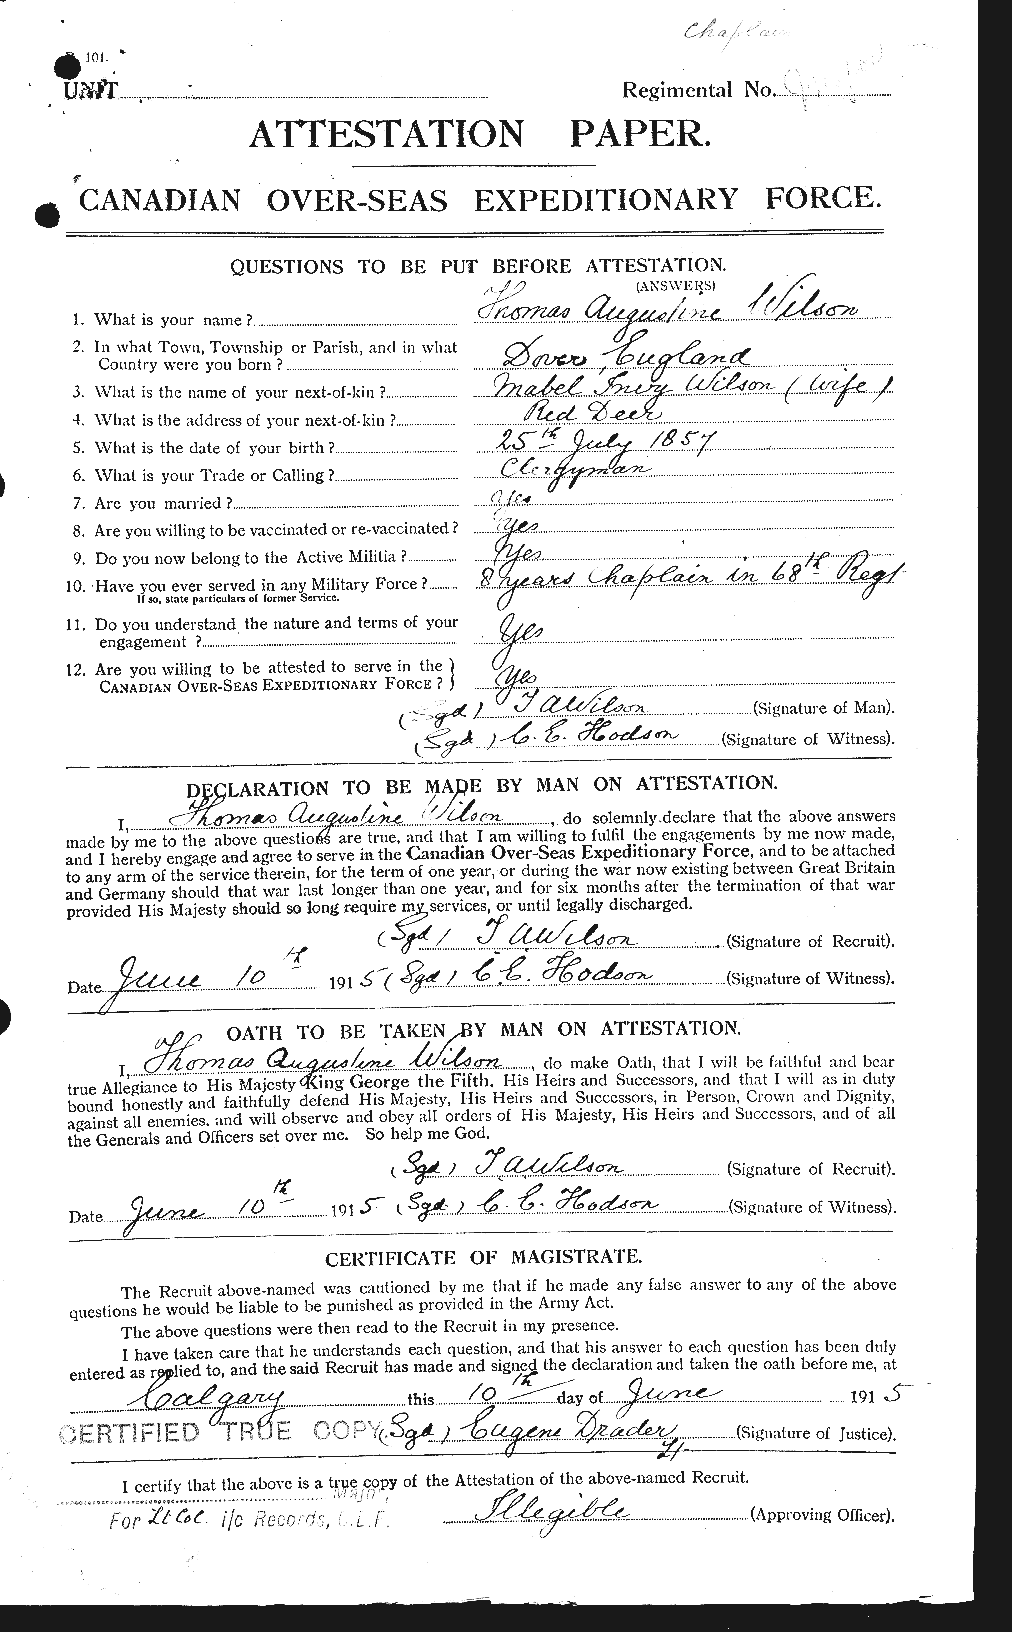 Personnel Records of the First World War - CEF 681236a